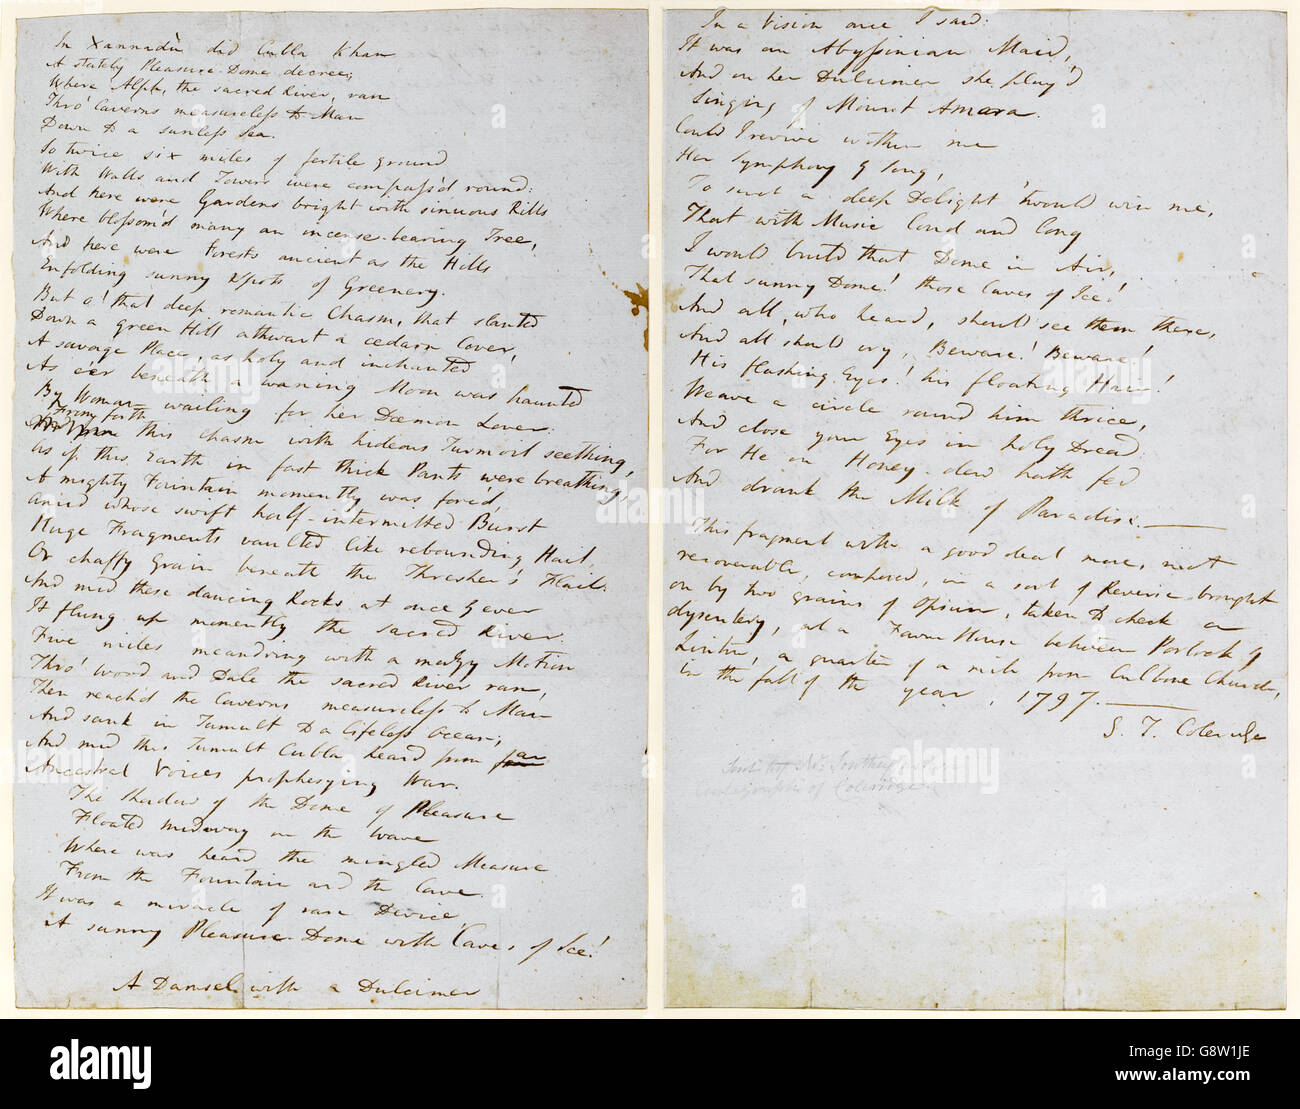 Original draft manuscript of ‘Kubla Khan or, A Vision in a Dream: A Fragment’ by Samuel Taylor Coleridge (1772-1834), the poem was composed after taking “two grains of opium taken to check a dysentery' in October 1797. See description for more information. Stock Photo